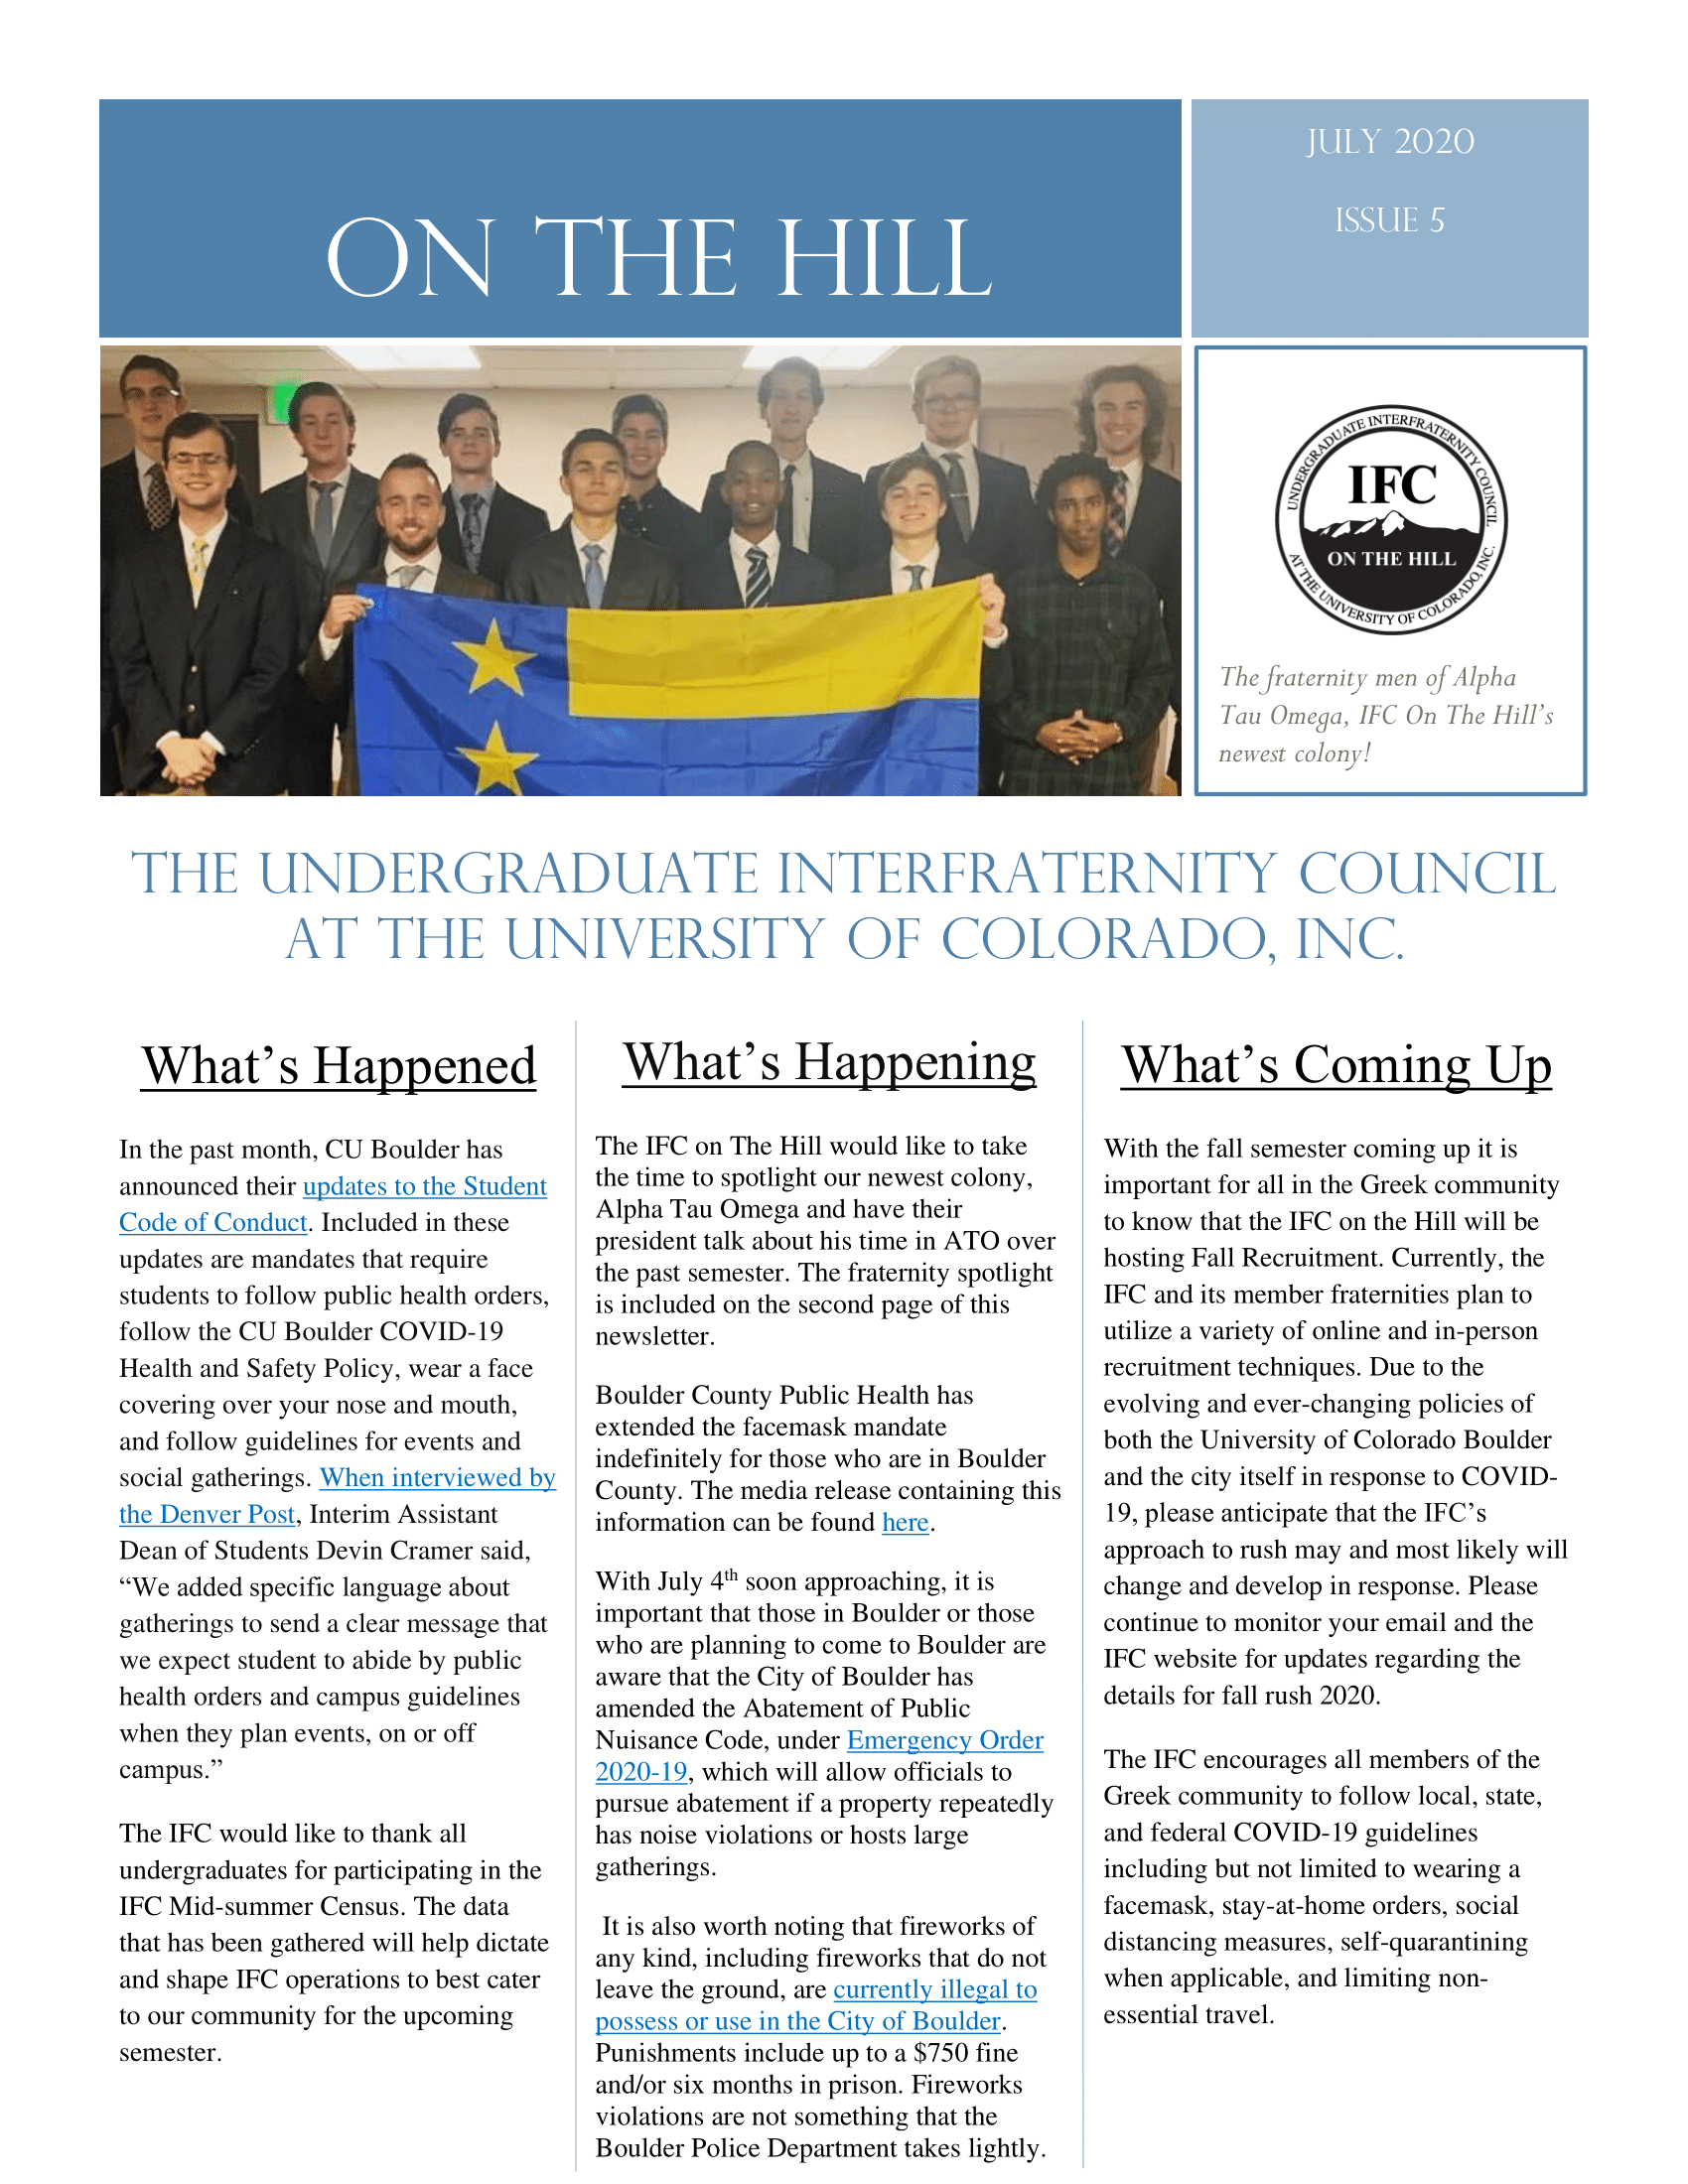 On The Hill, Issue #5-1.png